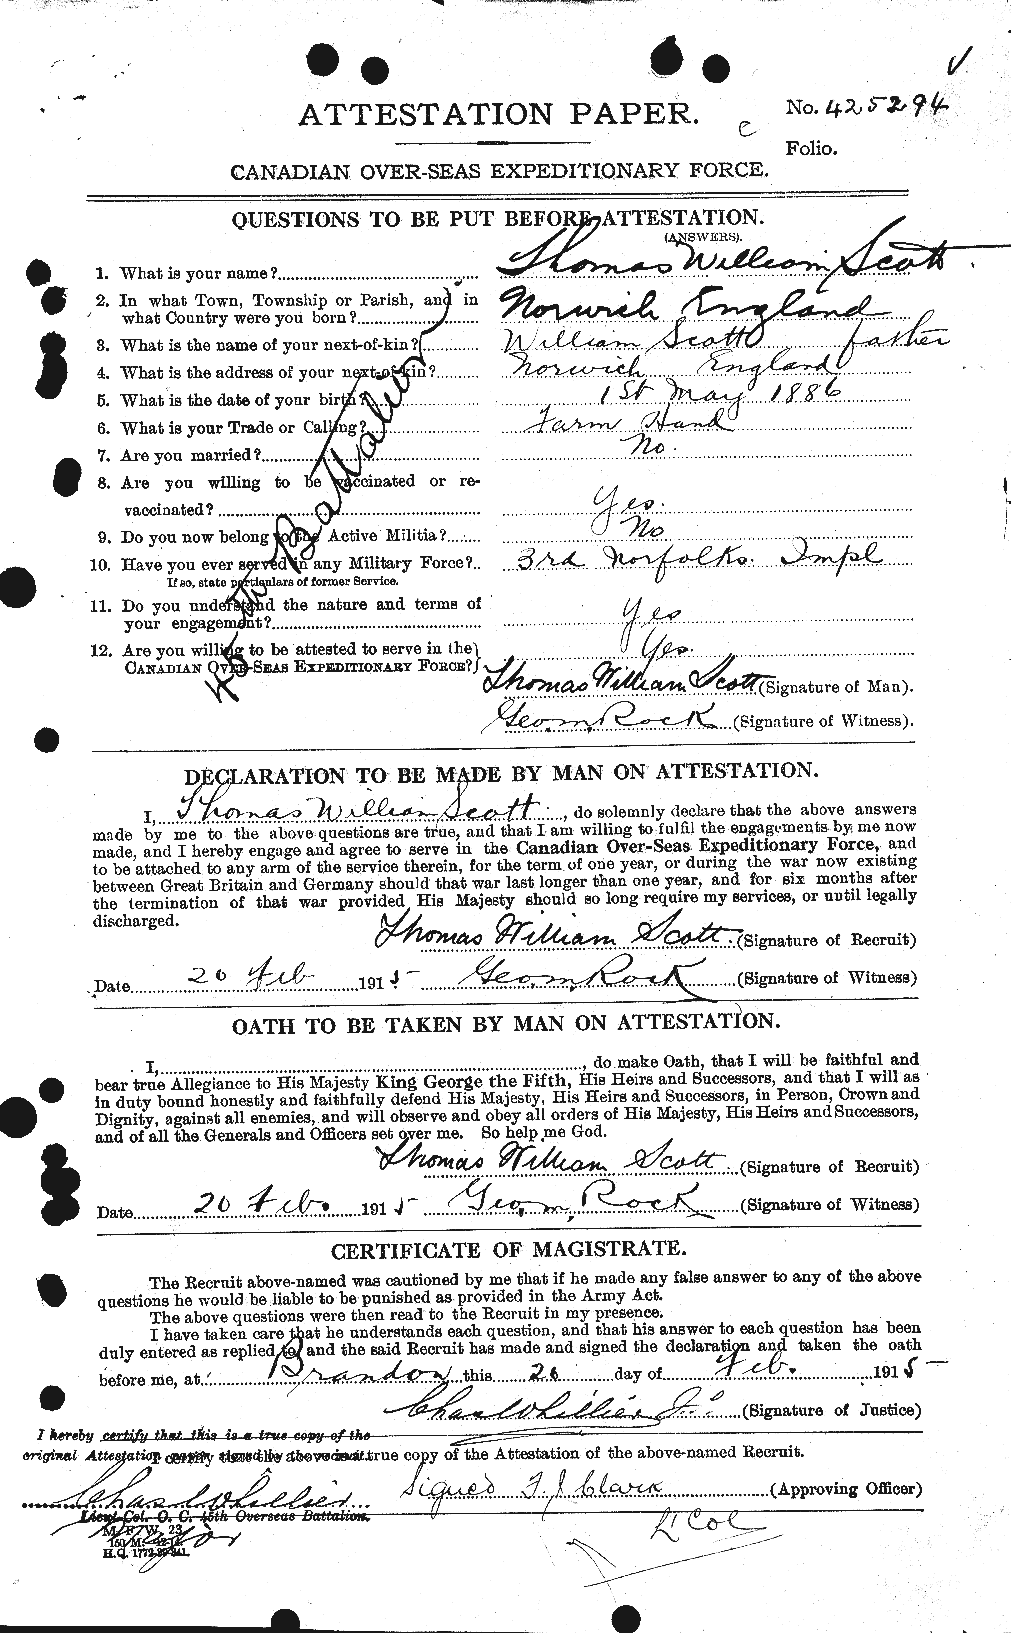 Personnel Records of the First World War - CEF 088214a